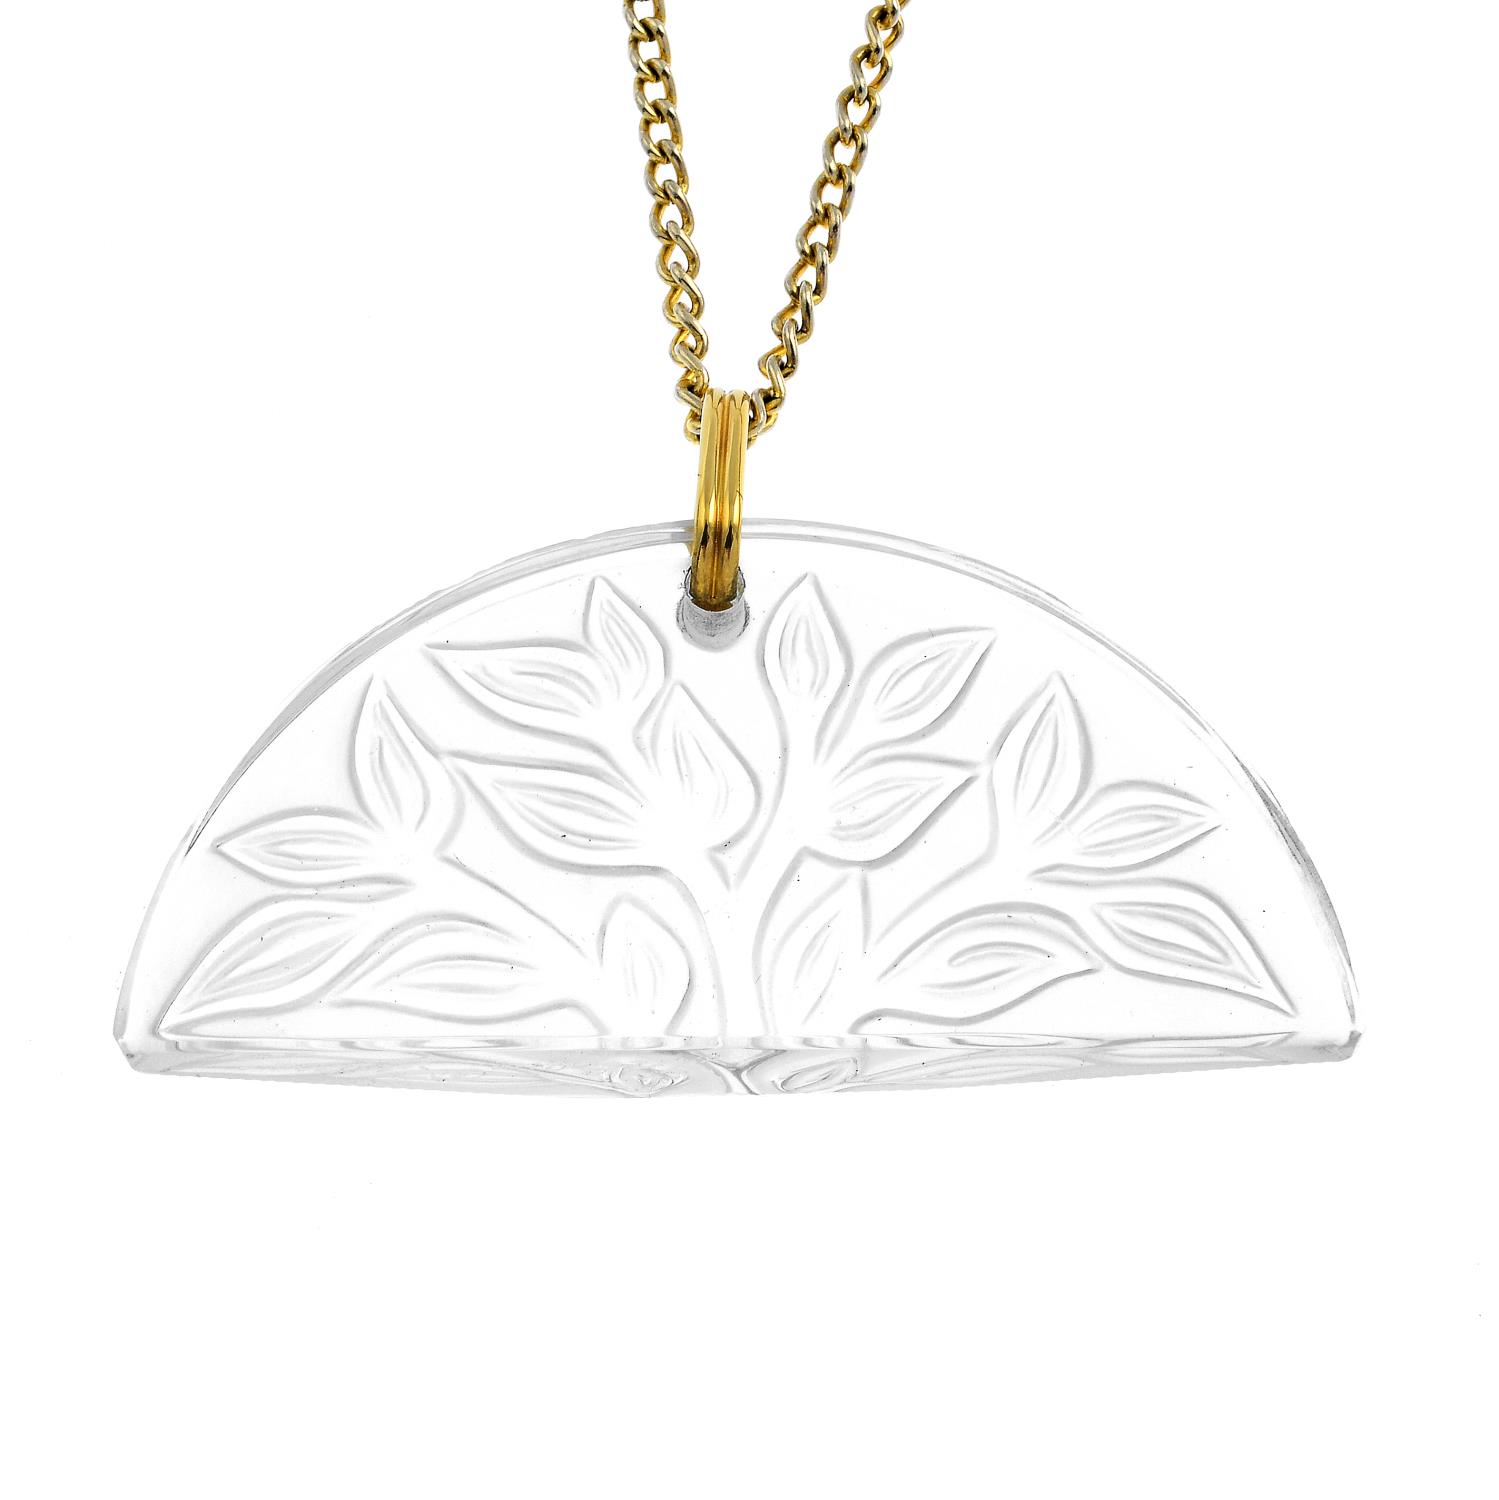 LALIQUE - a 'Tree of Life' pendant. The hemi-circular panel, with impressed foliate and frosted